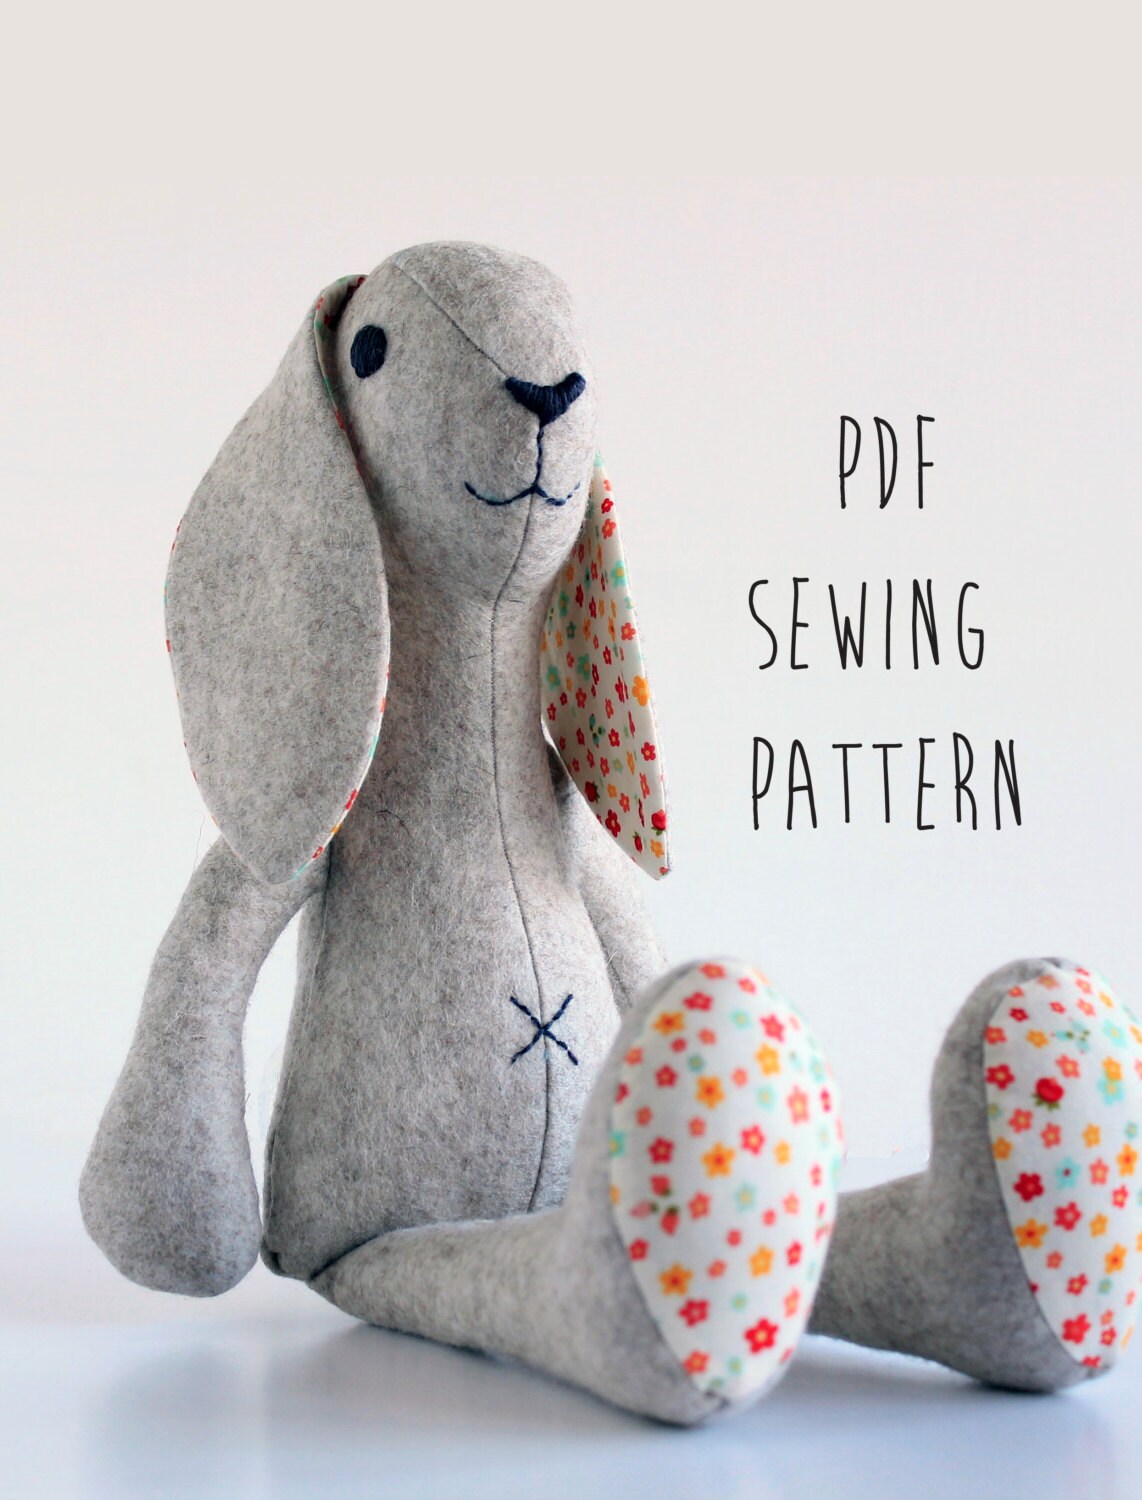 Rabbit sewing pattern pdf for instant download, bunny rabbit DIY tutorial